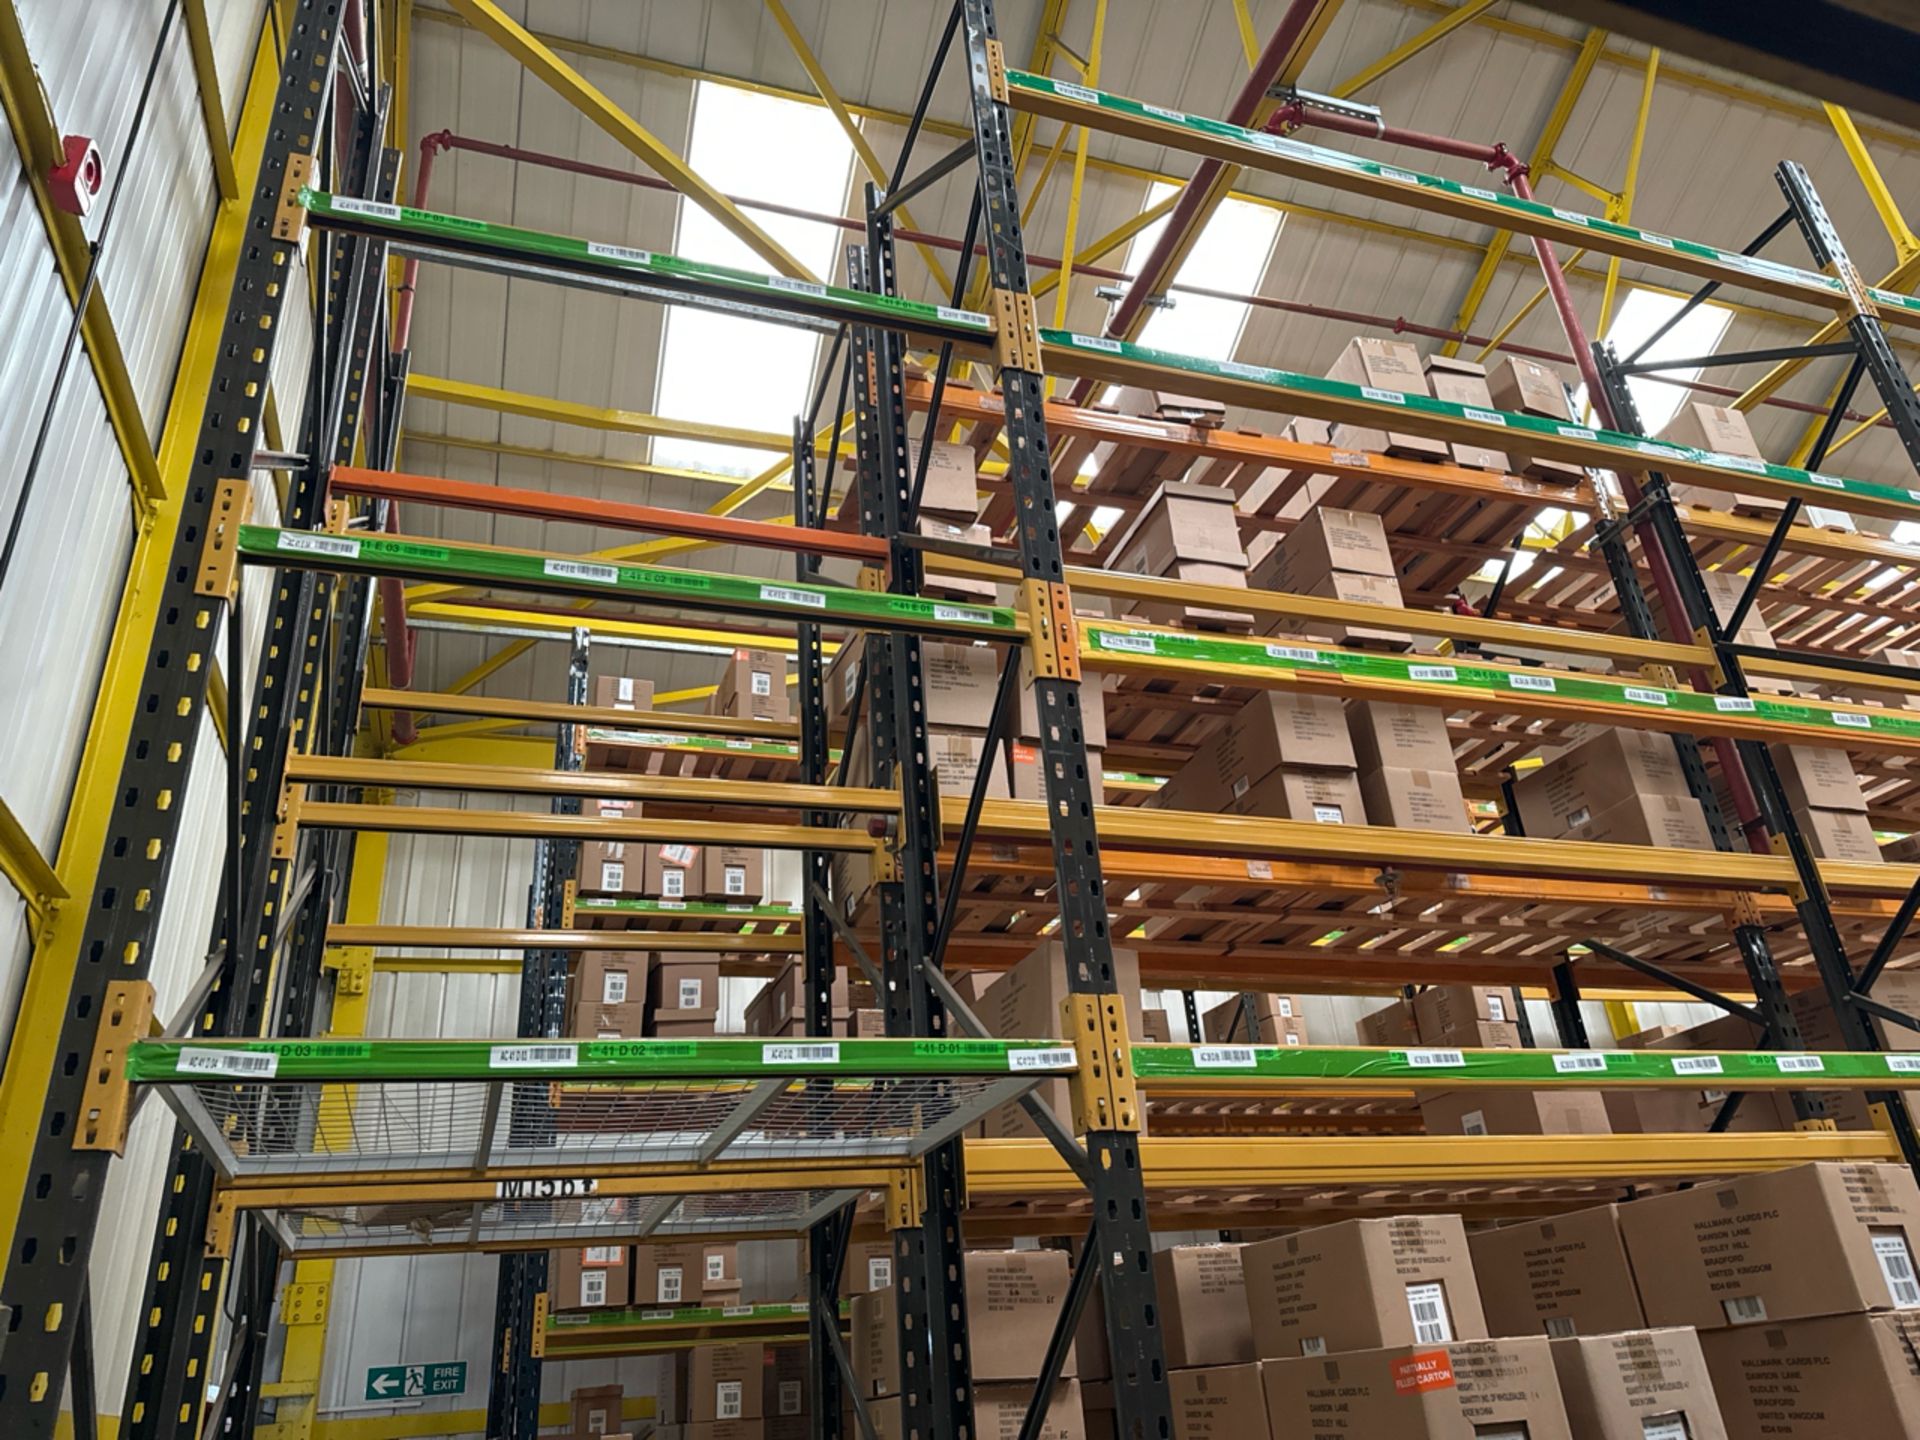 Run Of 42 Bays Of Back To Back Boltless Industrial Pallet Racking - Image 14 of 15